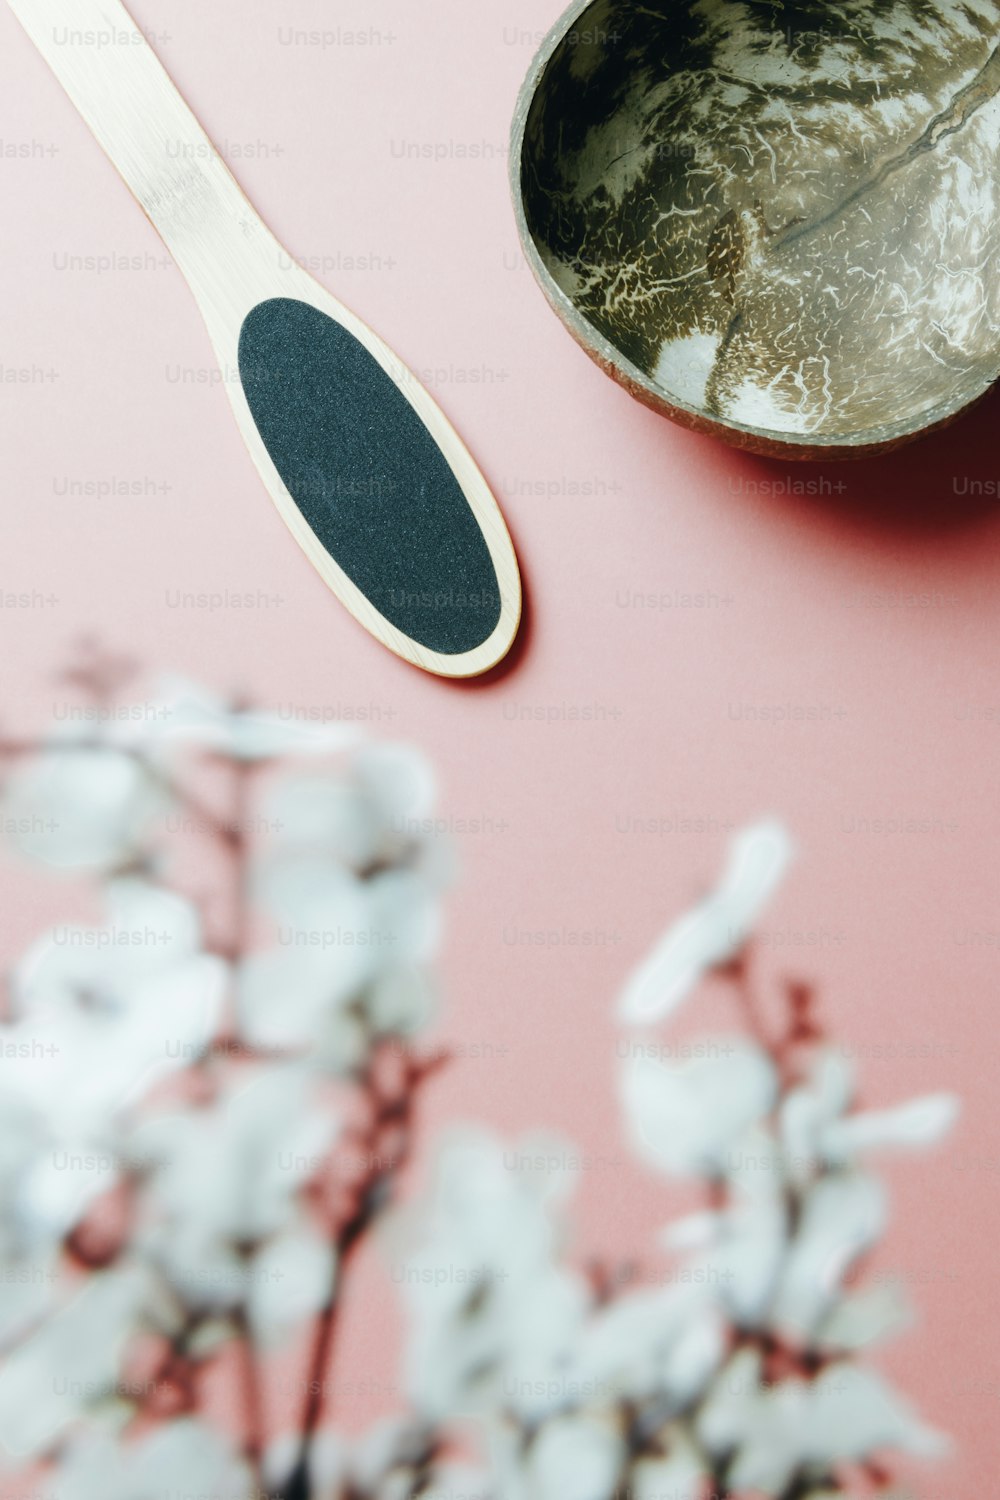 a spoon and spoon rest on a pink surface